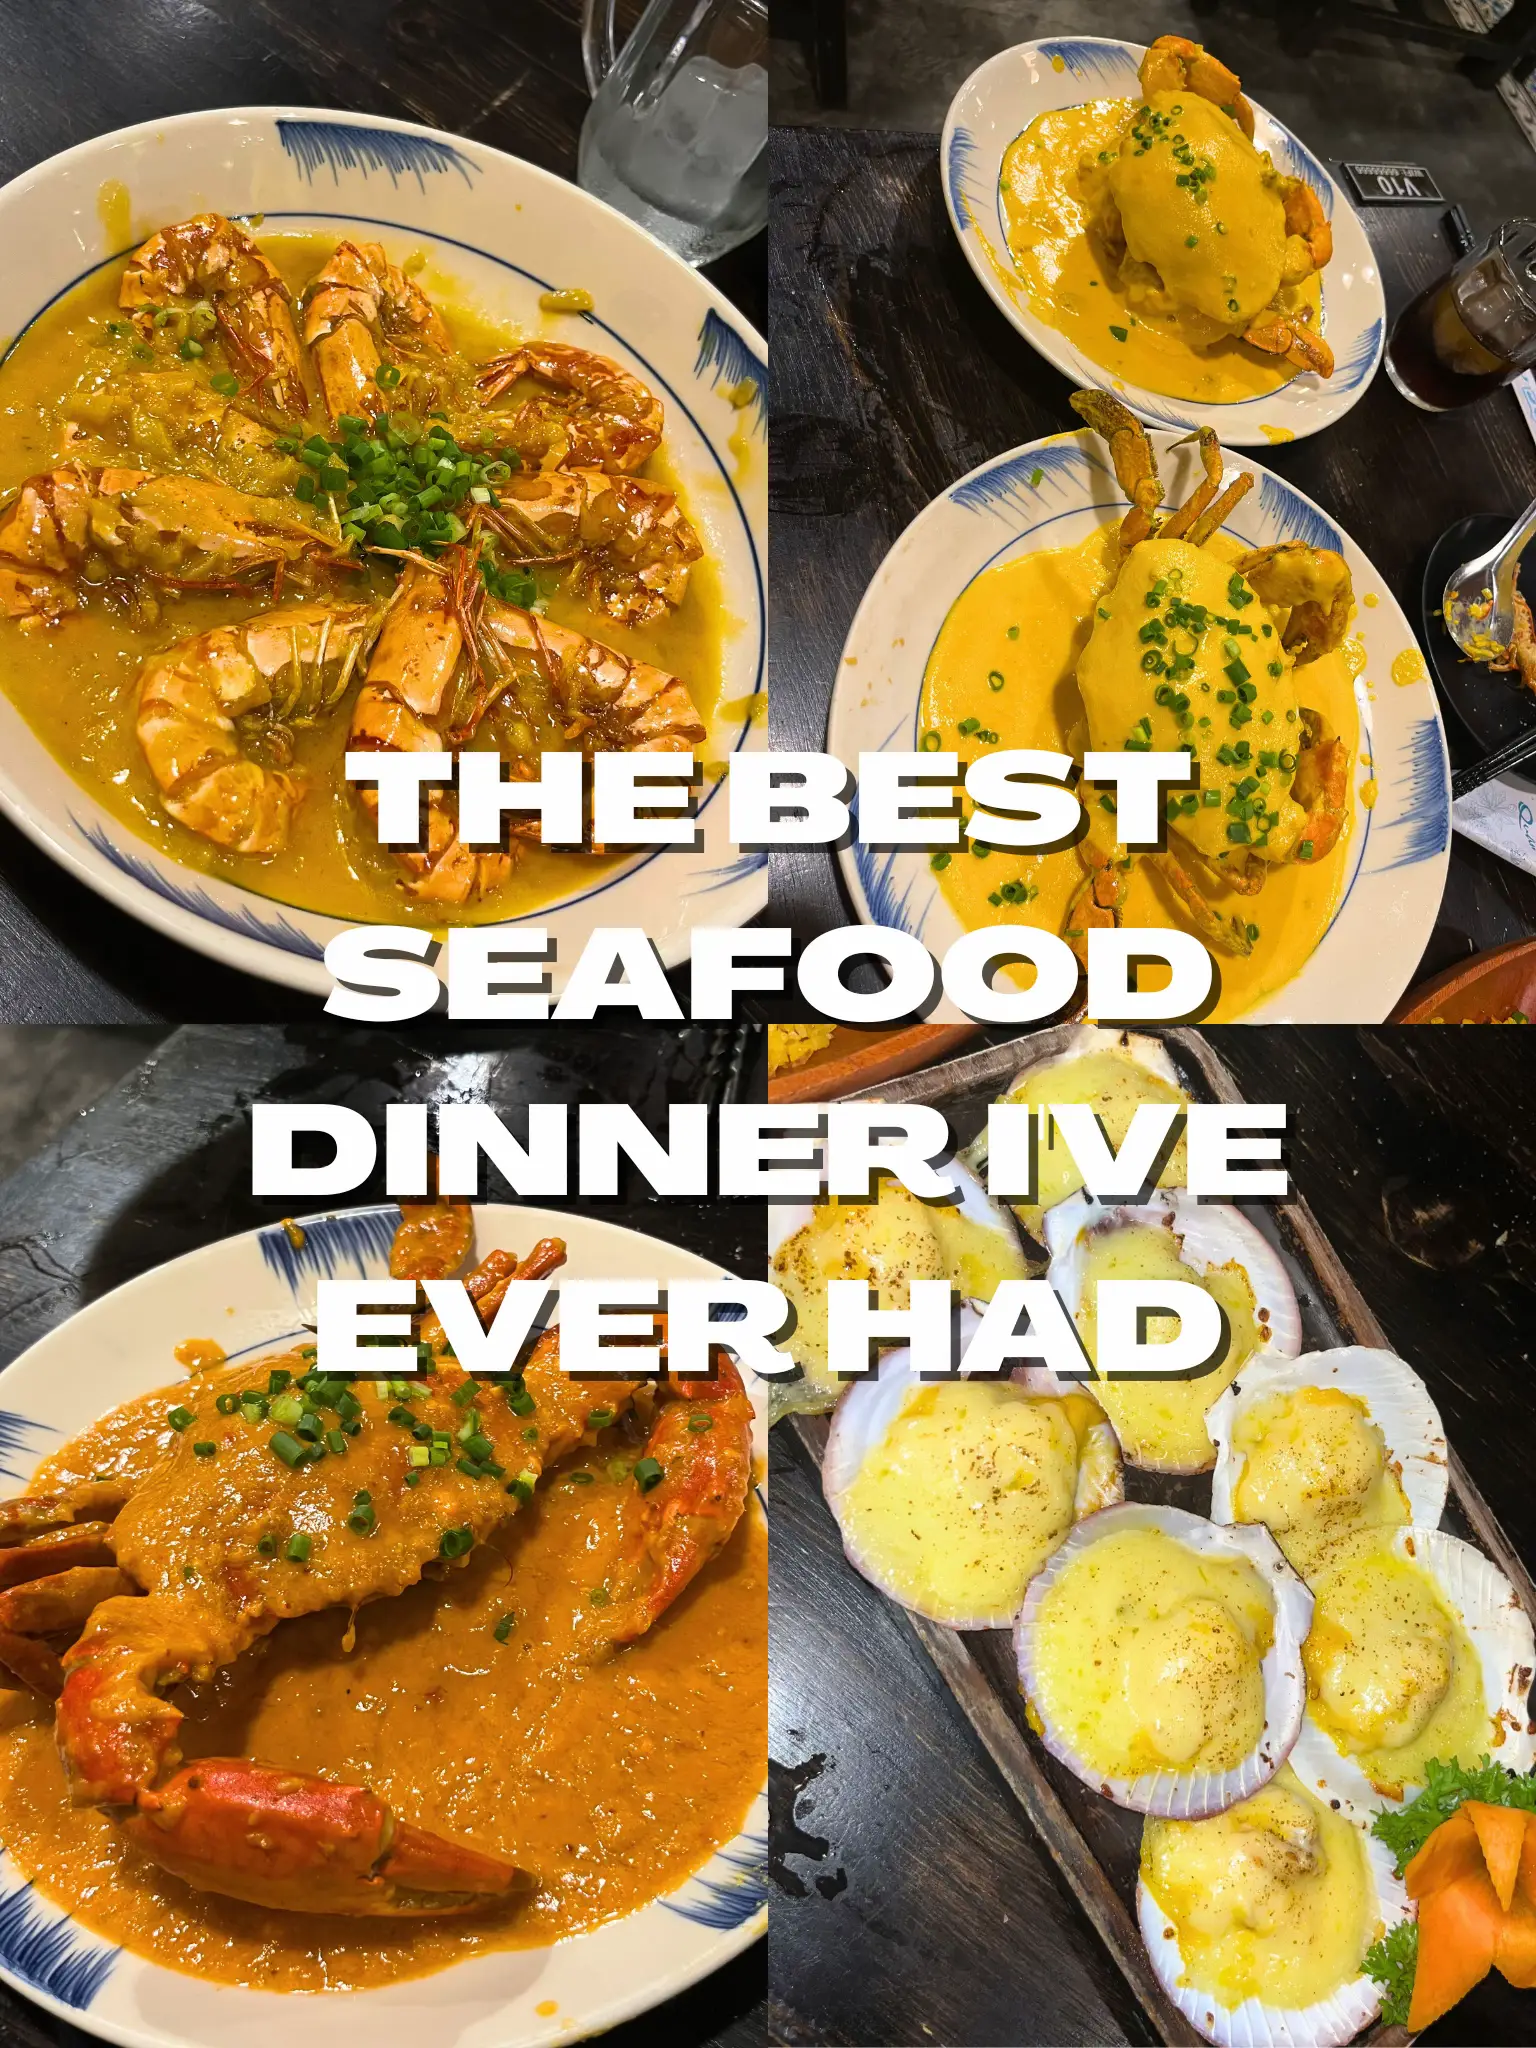 the yummiest seafood in da nang vietnam🇻🇳🦀🦐's images(0)